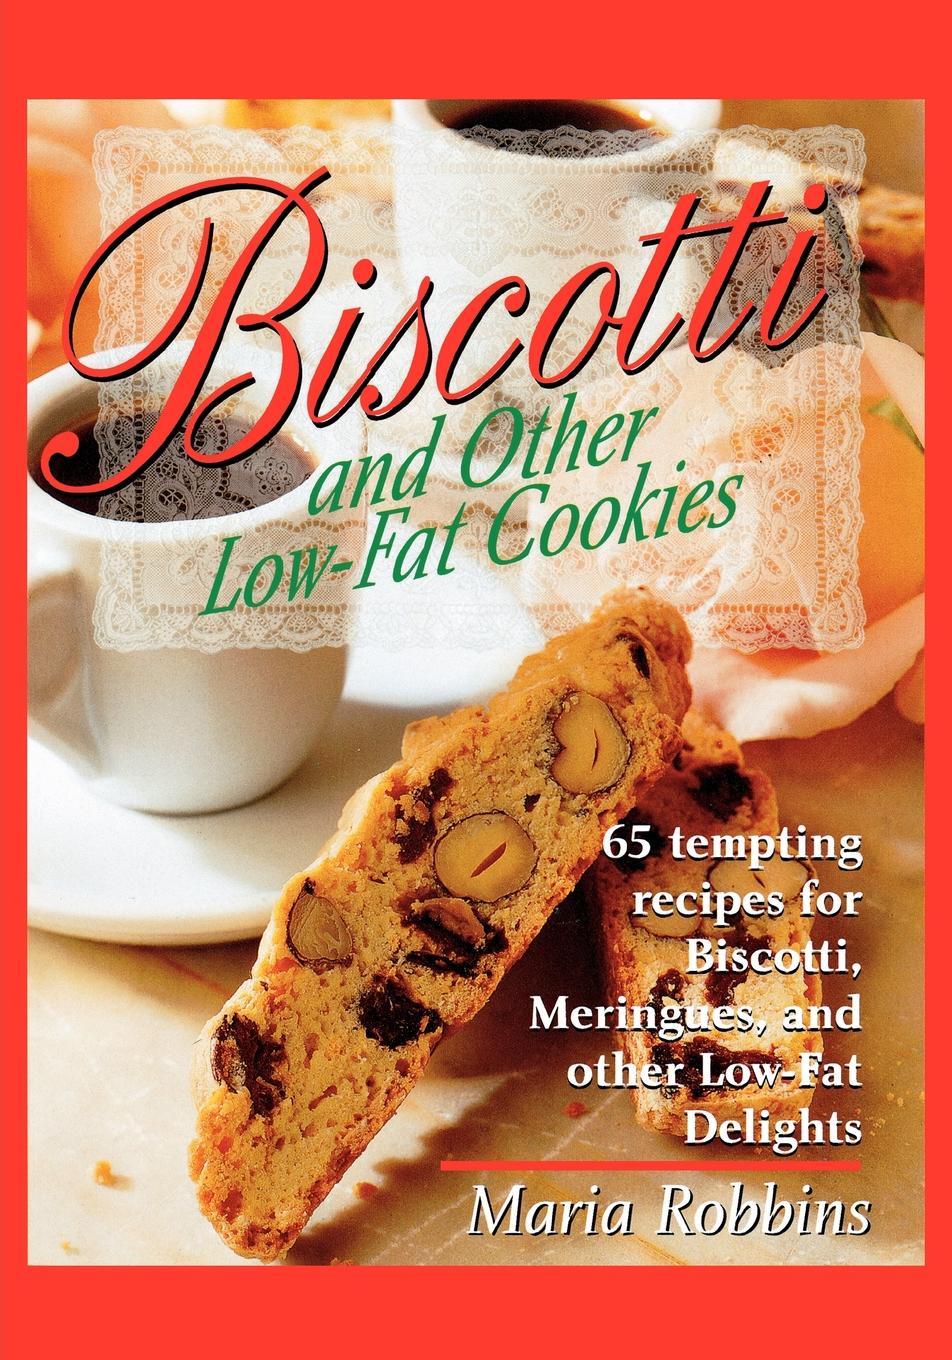 Biscotti & Other Low Fat Cookies. 65 Tempting Recipes for Biscotti, Meringues, and Other Low-Fat Delights